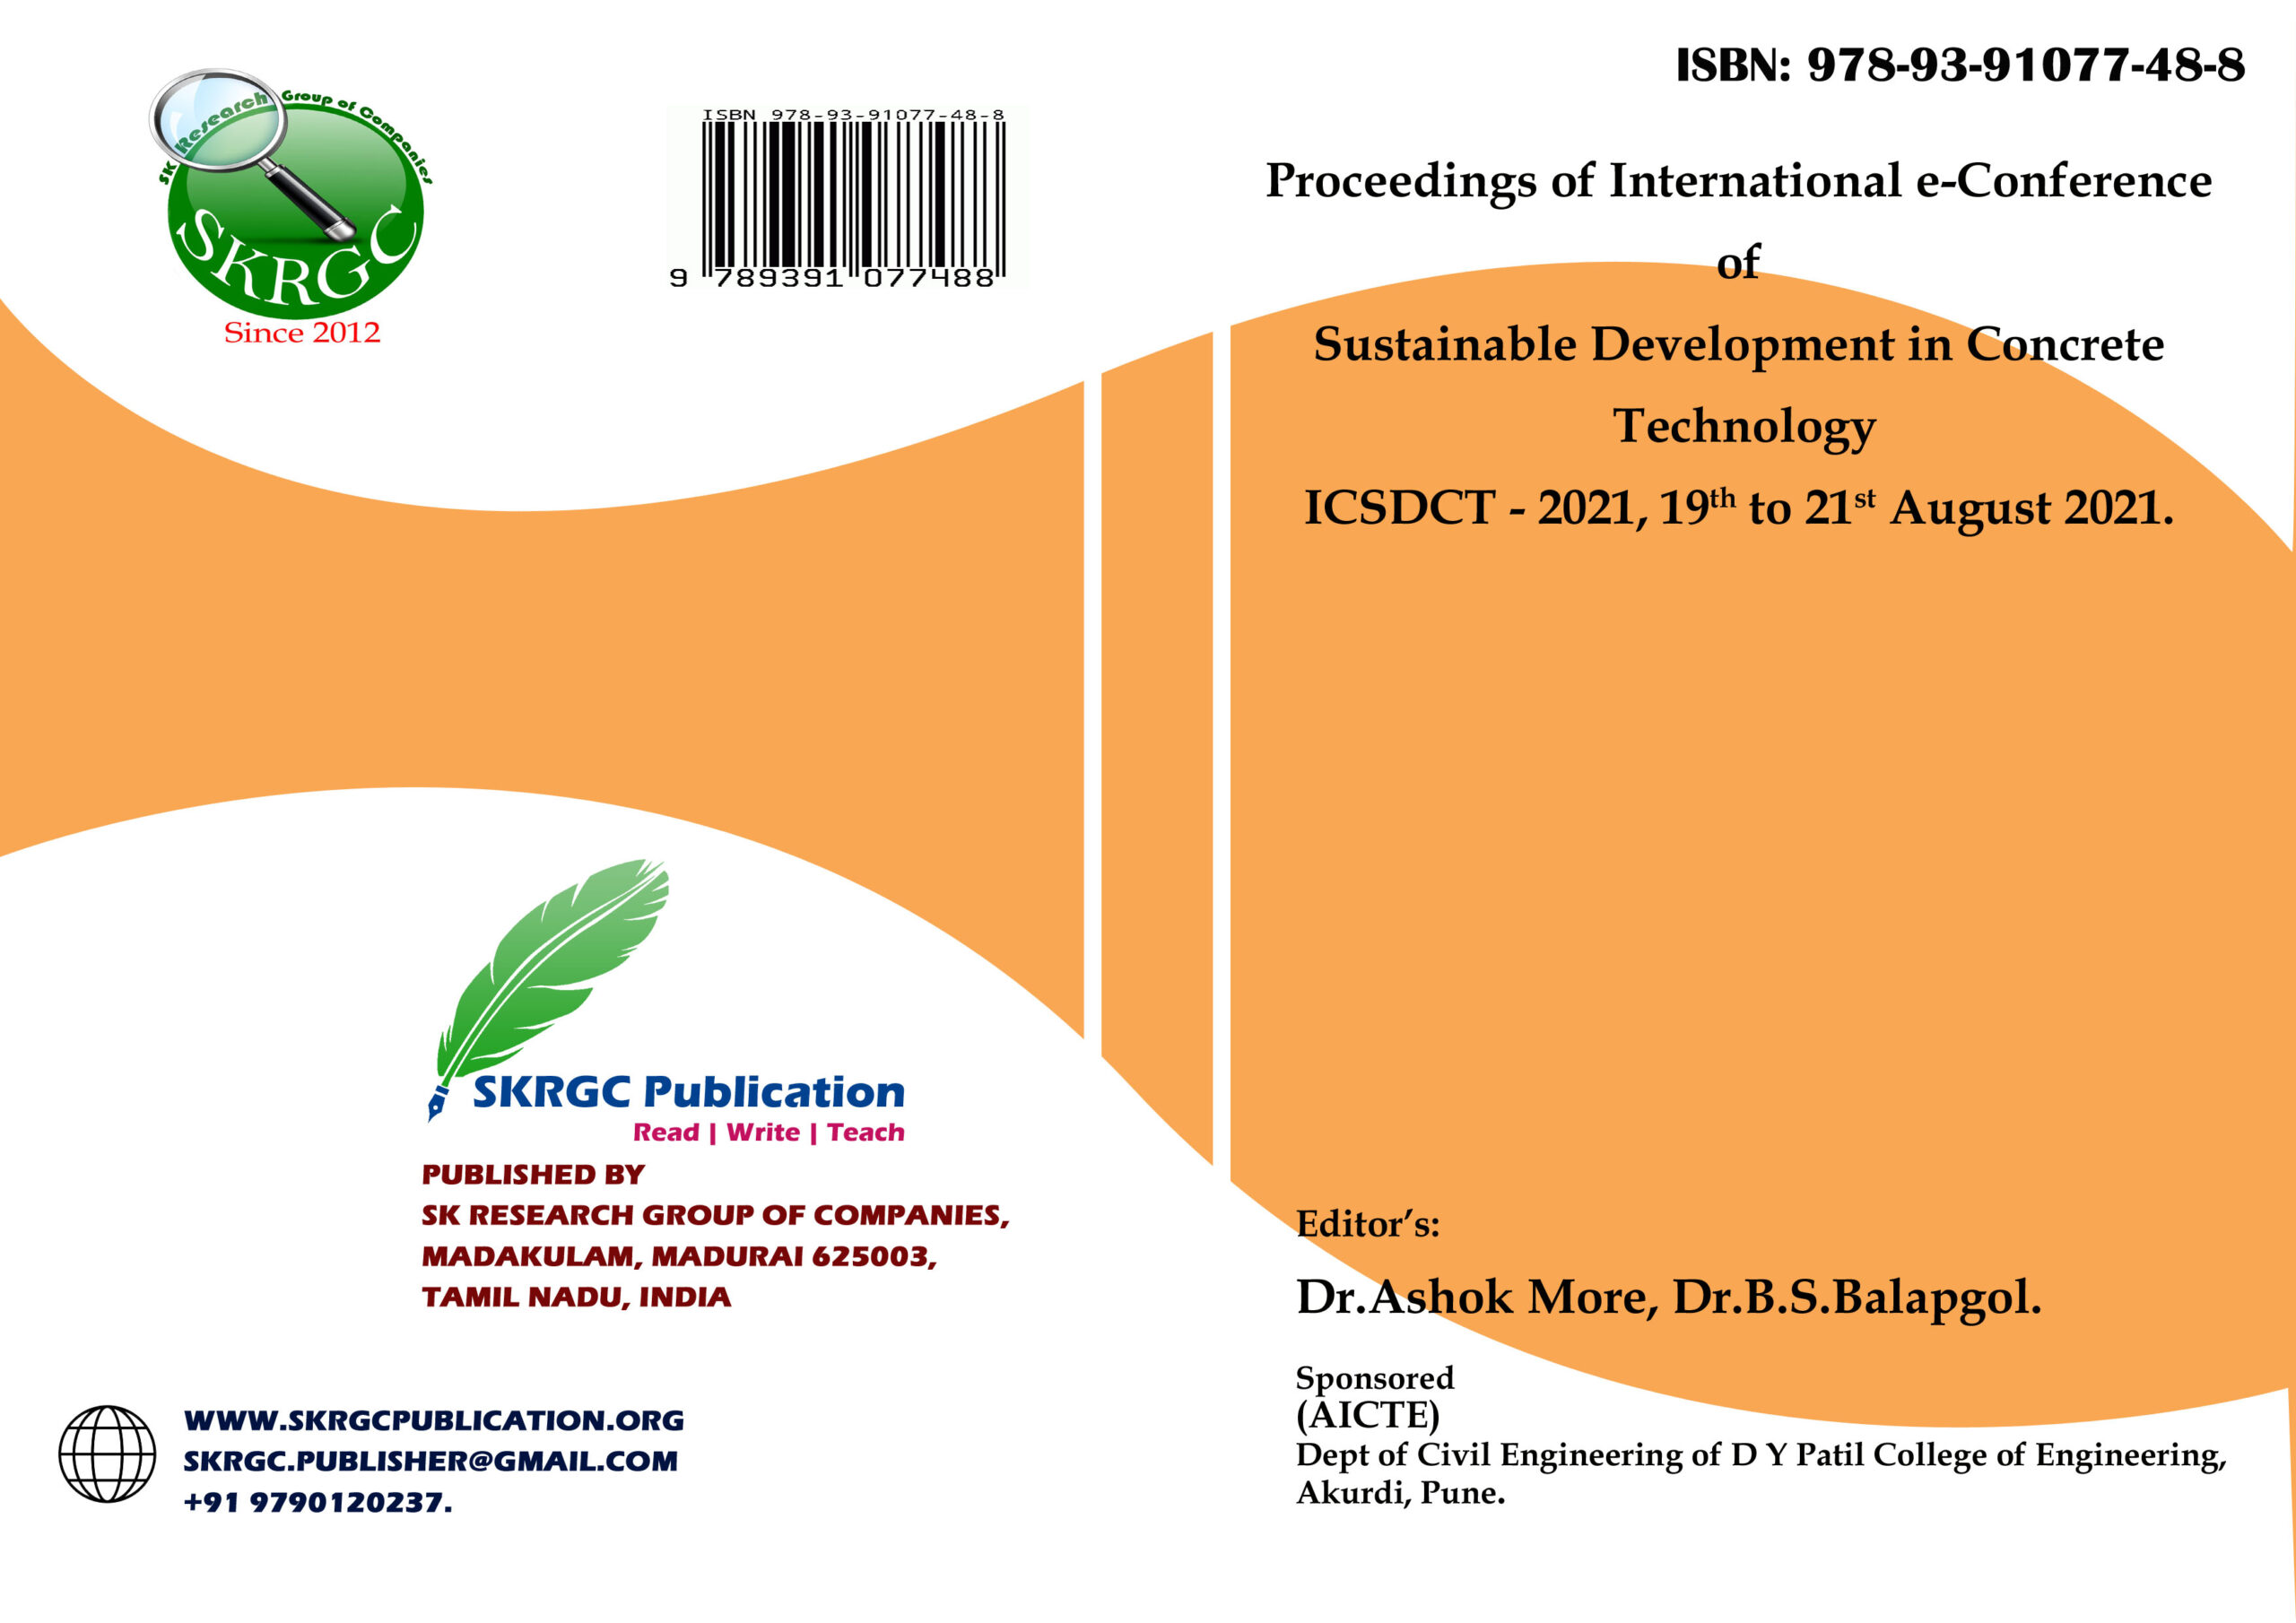 Proceedings of International e-Conference of Sustainable Development in Concrete Technology ICSDCT – 2021, 19th to 21st August 2021.